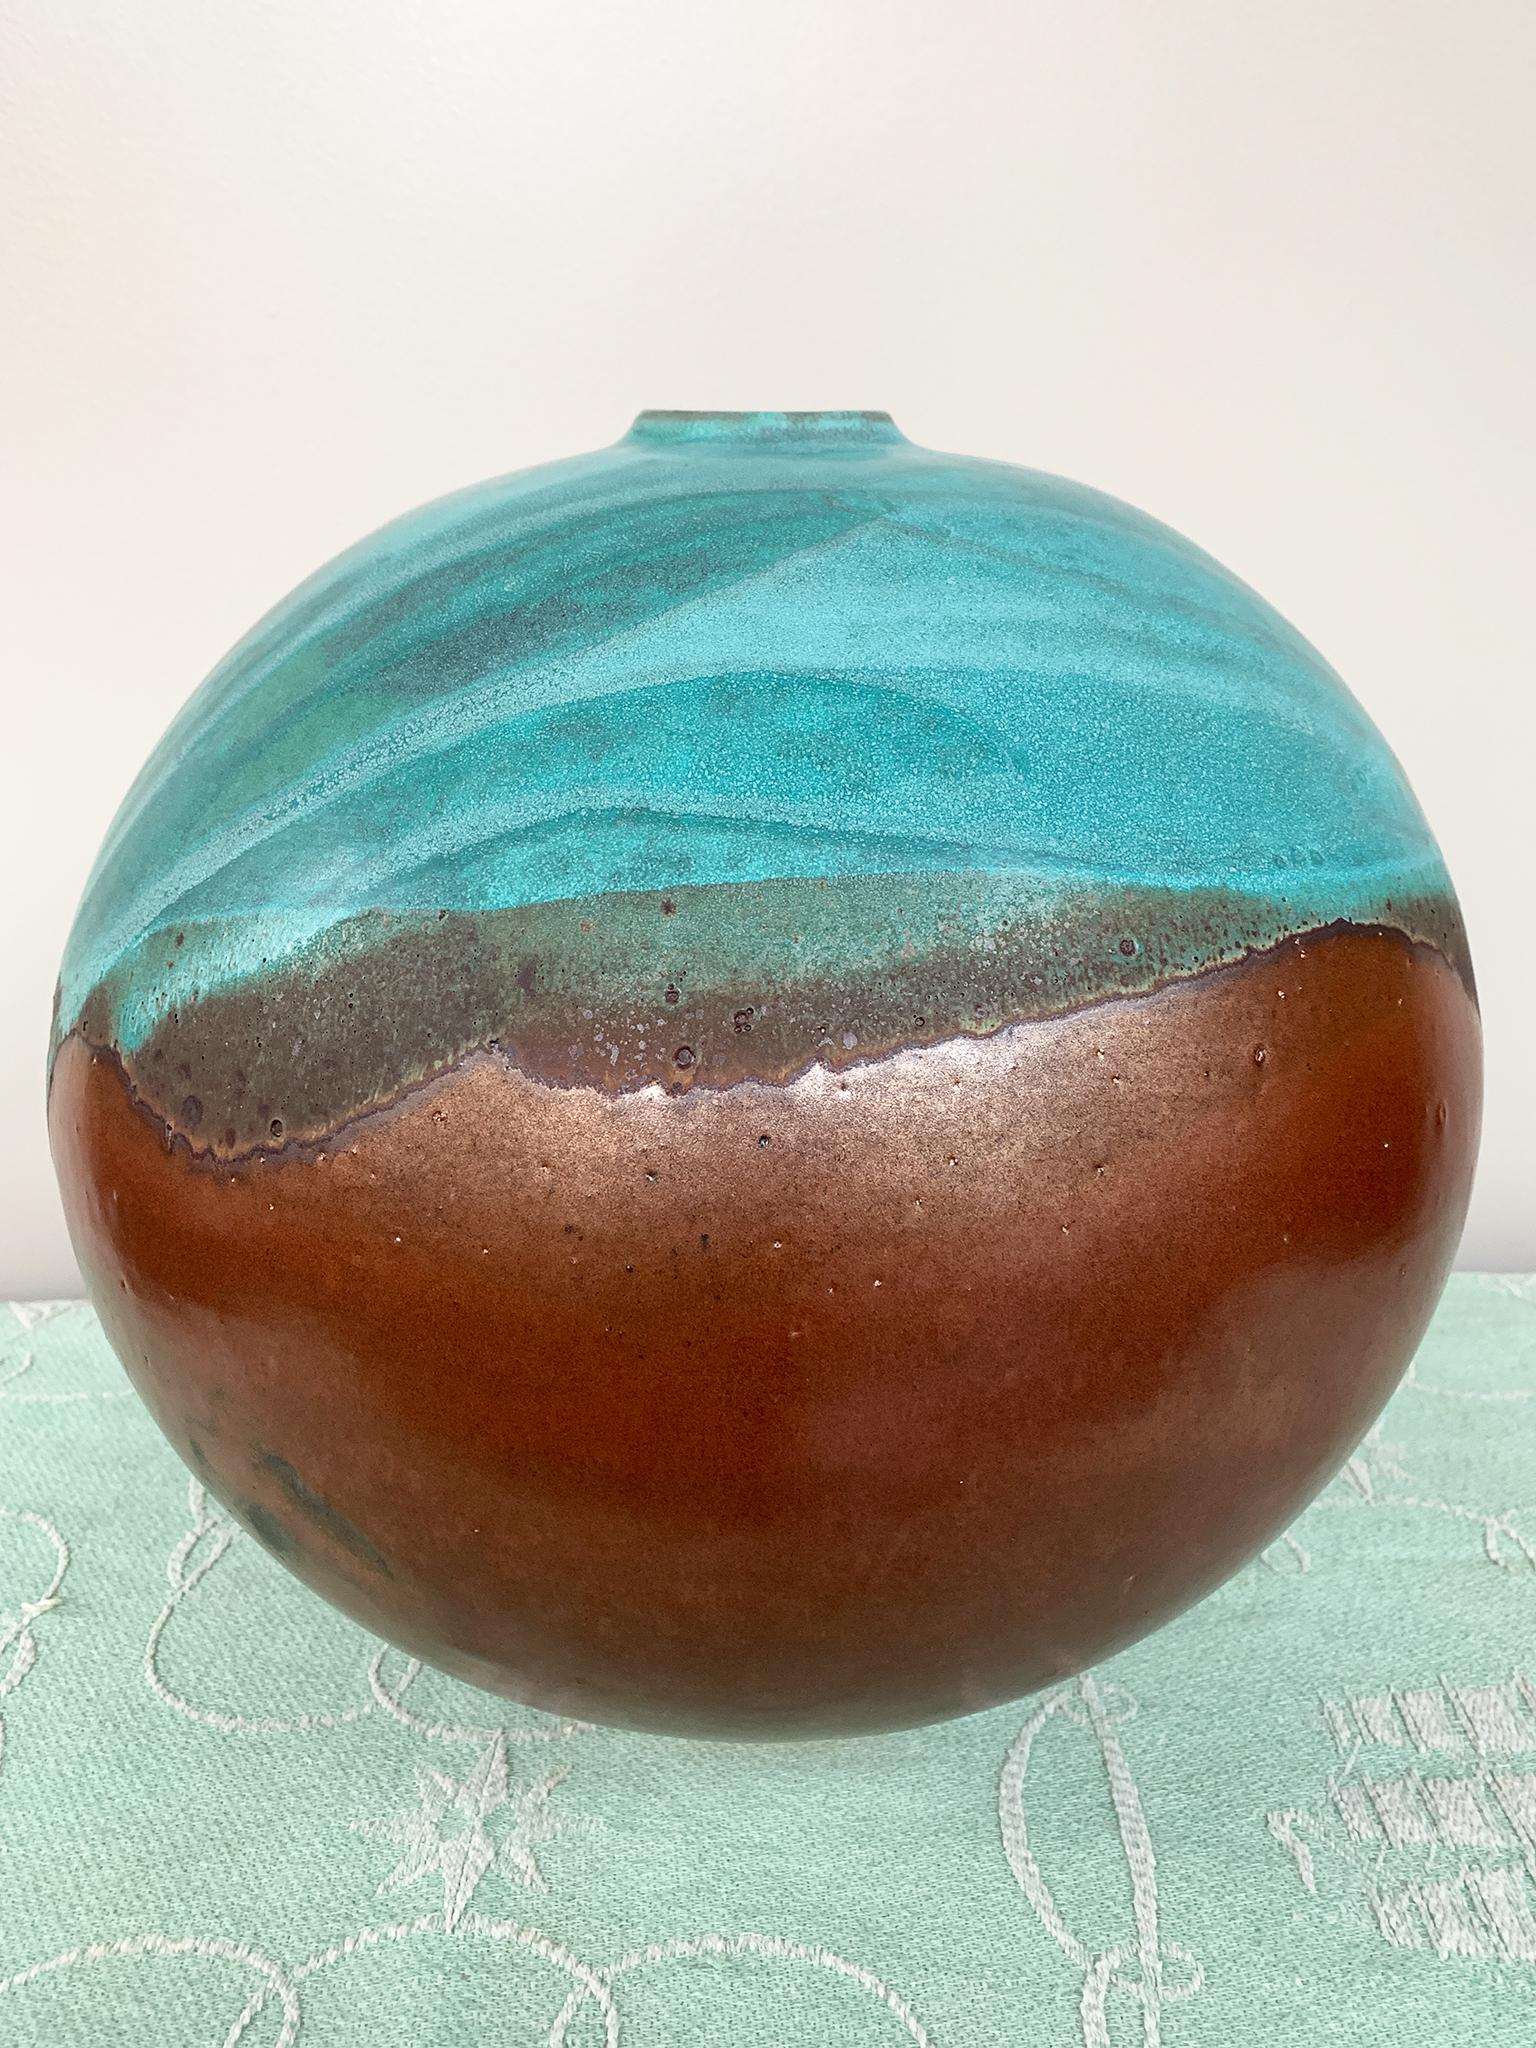 From Thom Lussier's Oxidized Copper Collection - a series of ceramic vessels that stand out for their brilliant palette and rich textures. This vessel is spherical in form with a lipped opening.

White stoneware with metallic